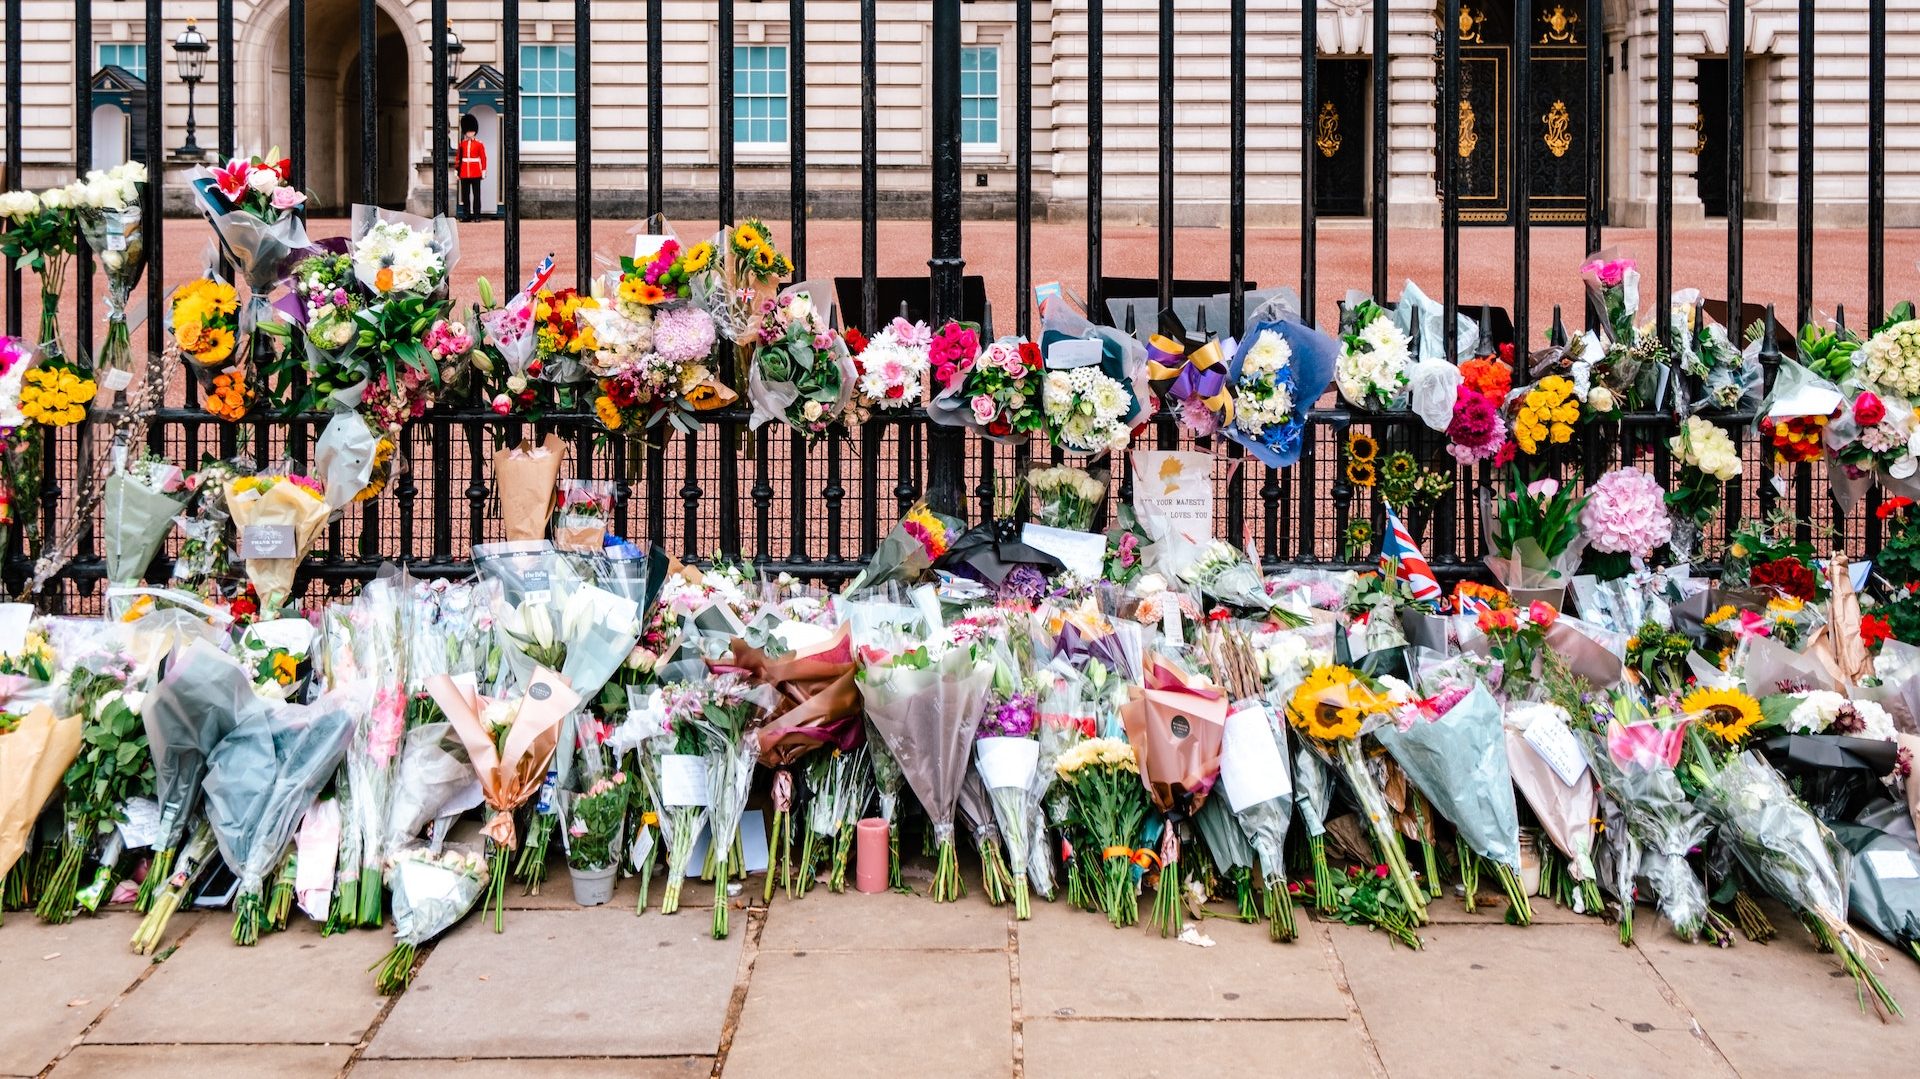 marmalade sandwiches were among the floral tributes